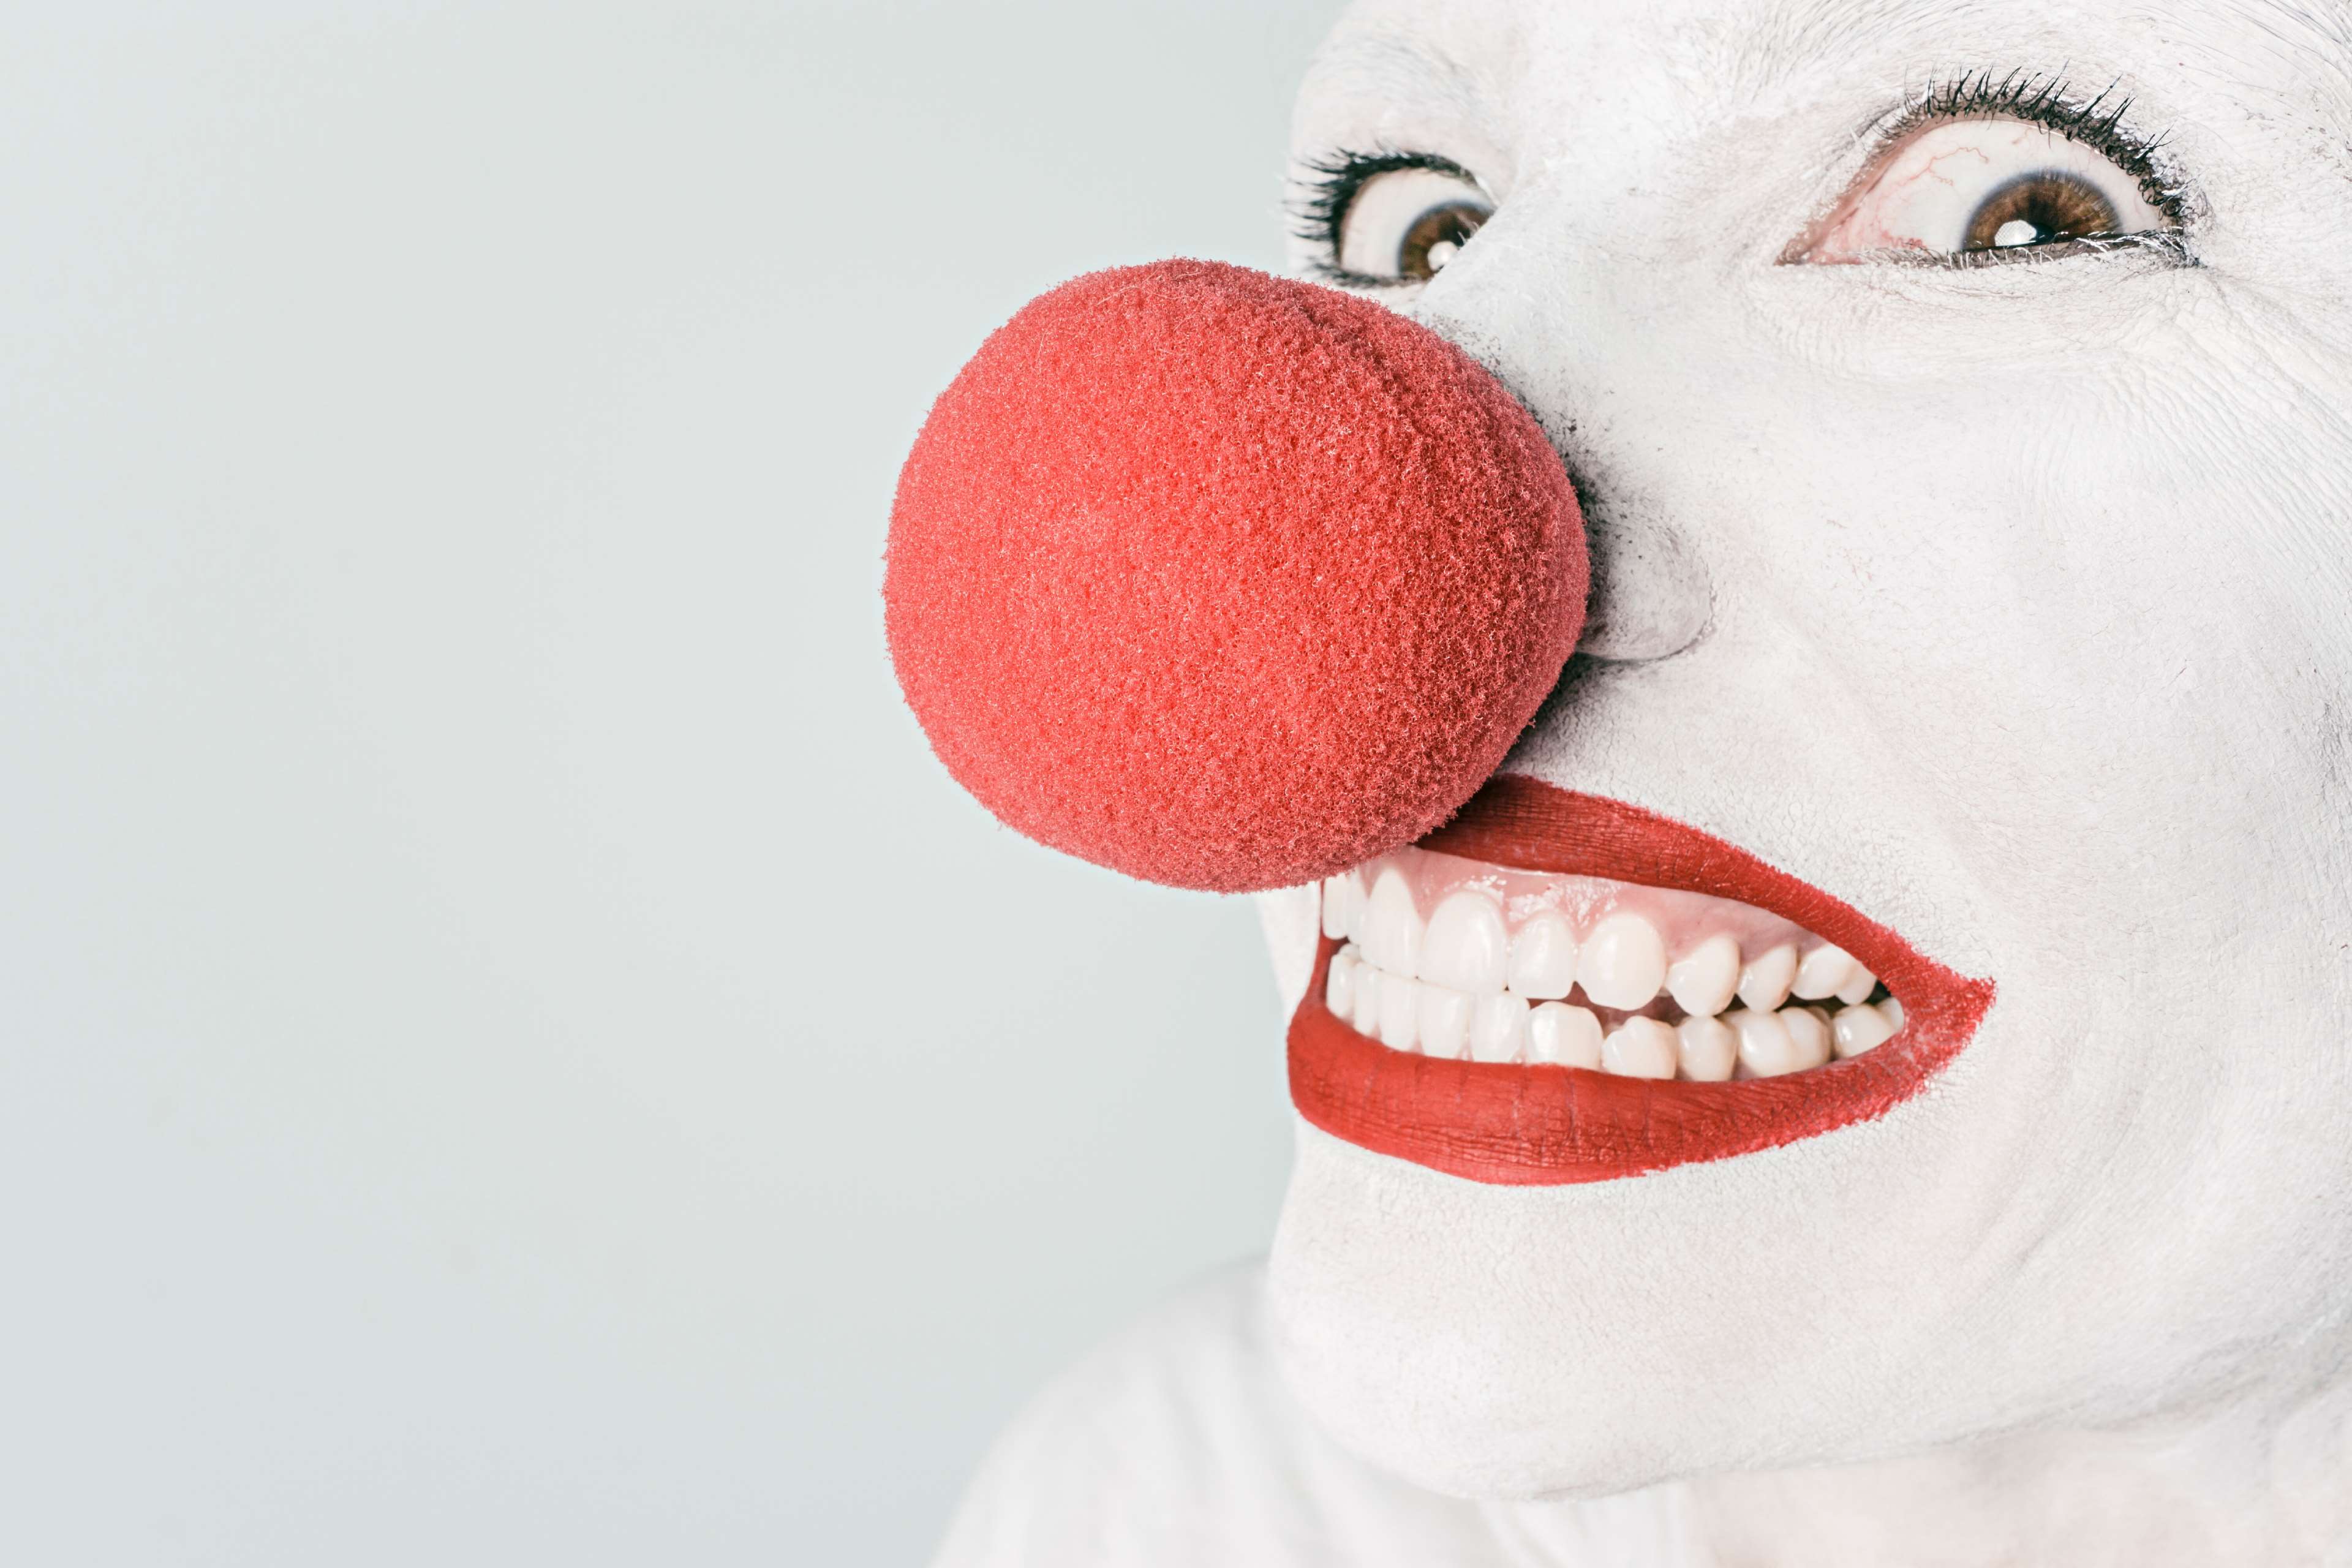 artist, circus, clown, comedian, comedy, funny, grinning, happy, head, humour, joke, joking, laughing, makeup, man, nose, painted, person, red, smile, smiling, white 4k wallpaper